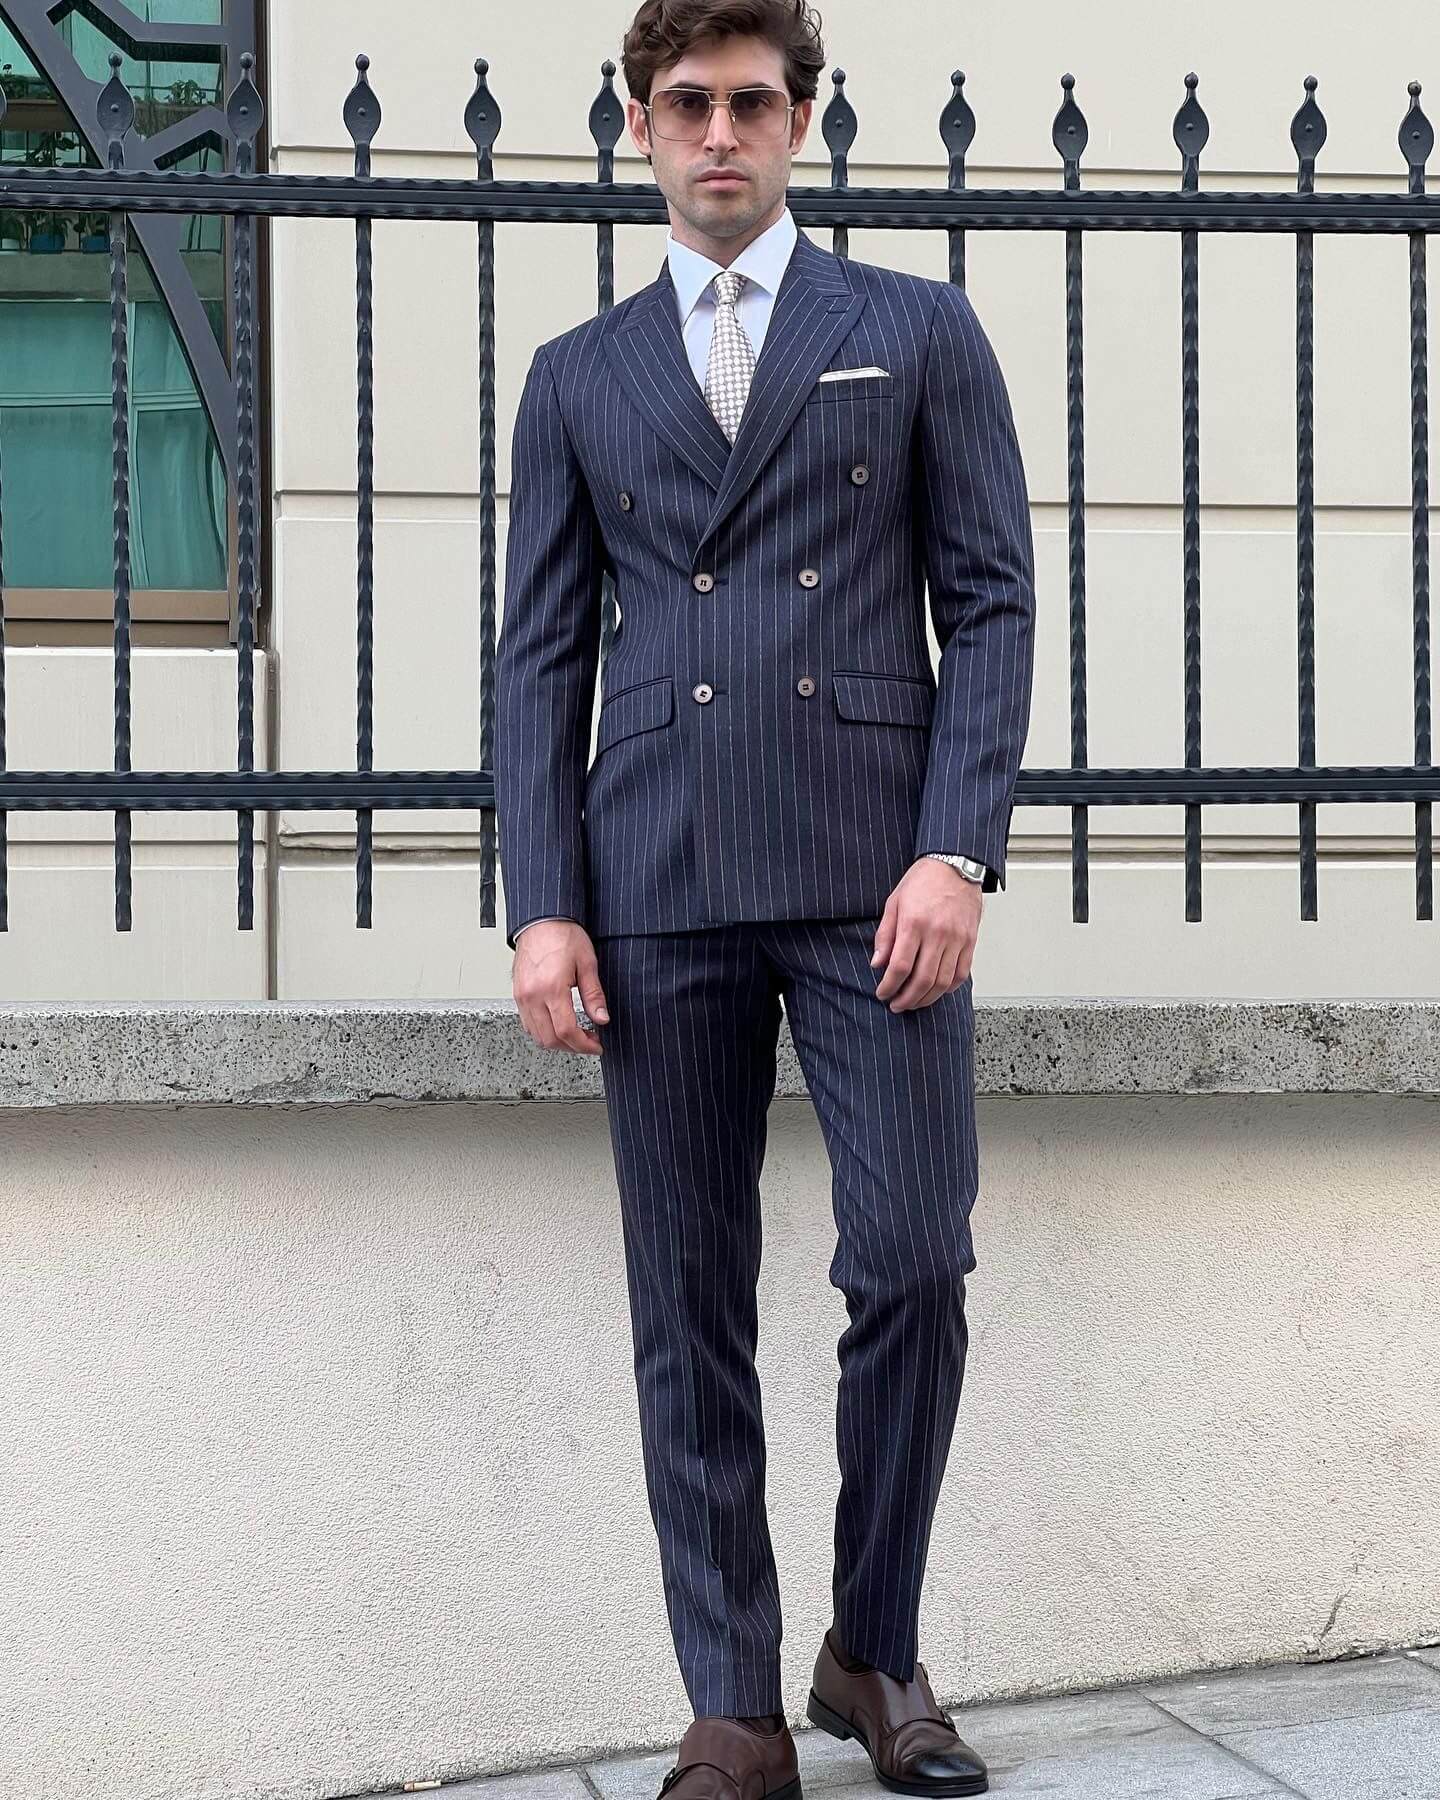 Witness the epitome of modern suiting as our model showcases the sleek lines of the Smoked Wool suit